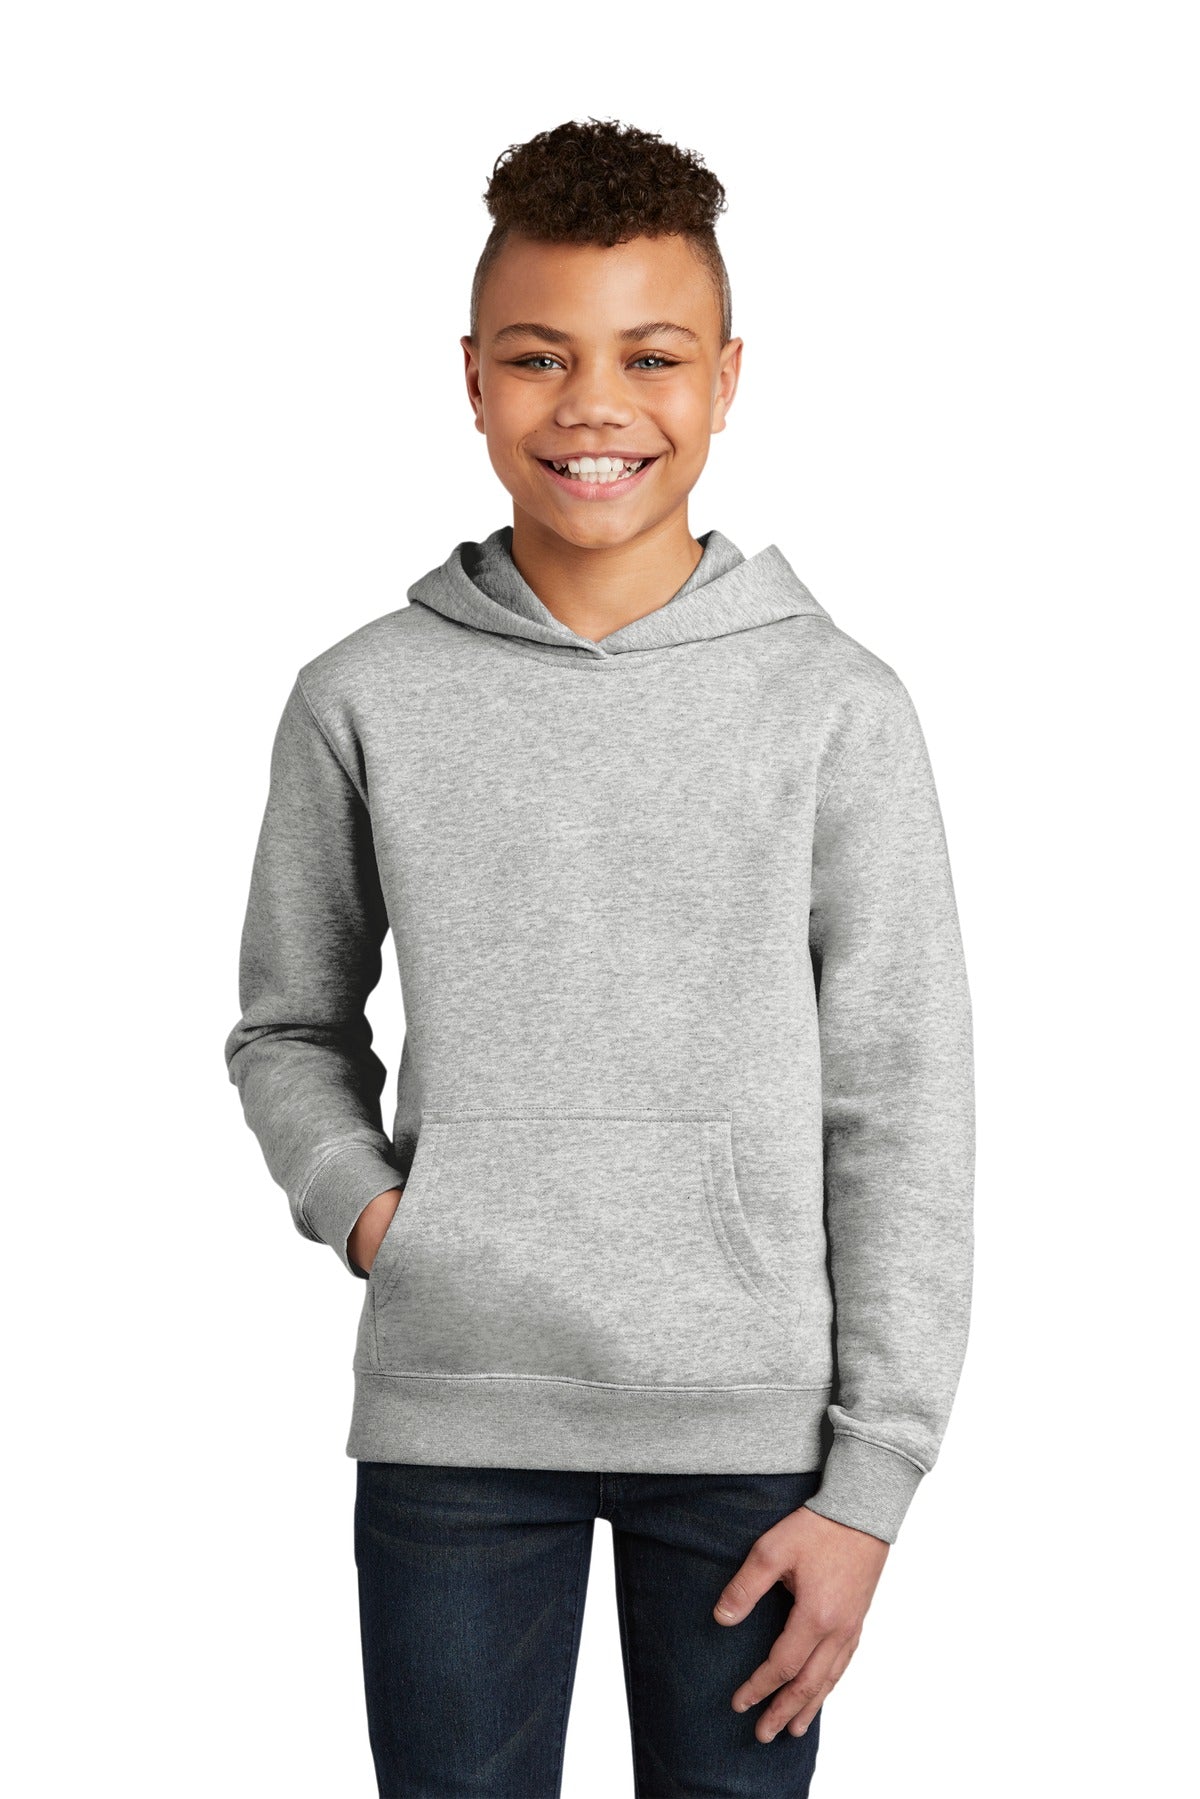 District® Youth V.I.T.™Fleece Hoodie DT6100Y